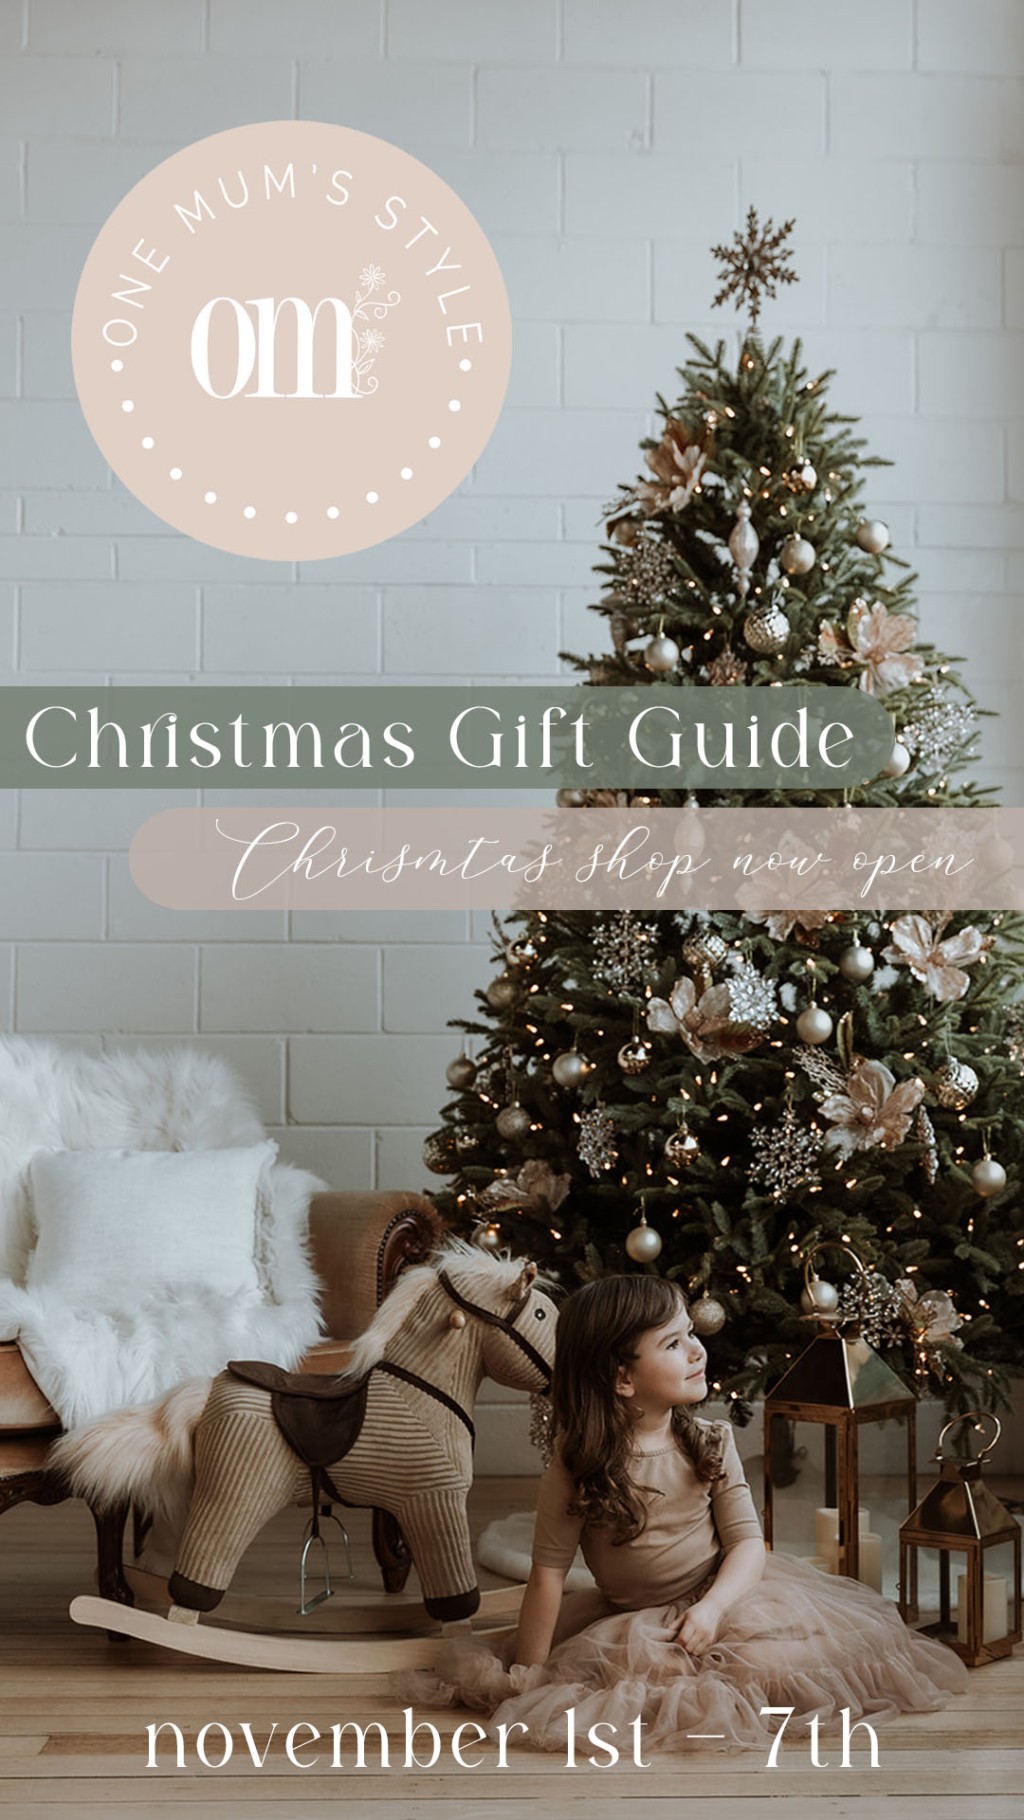 One Mums Christmas Gift Guide